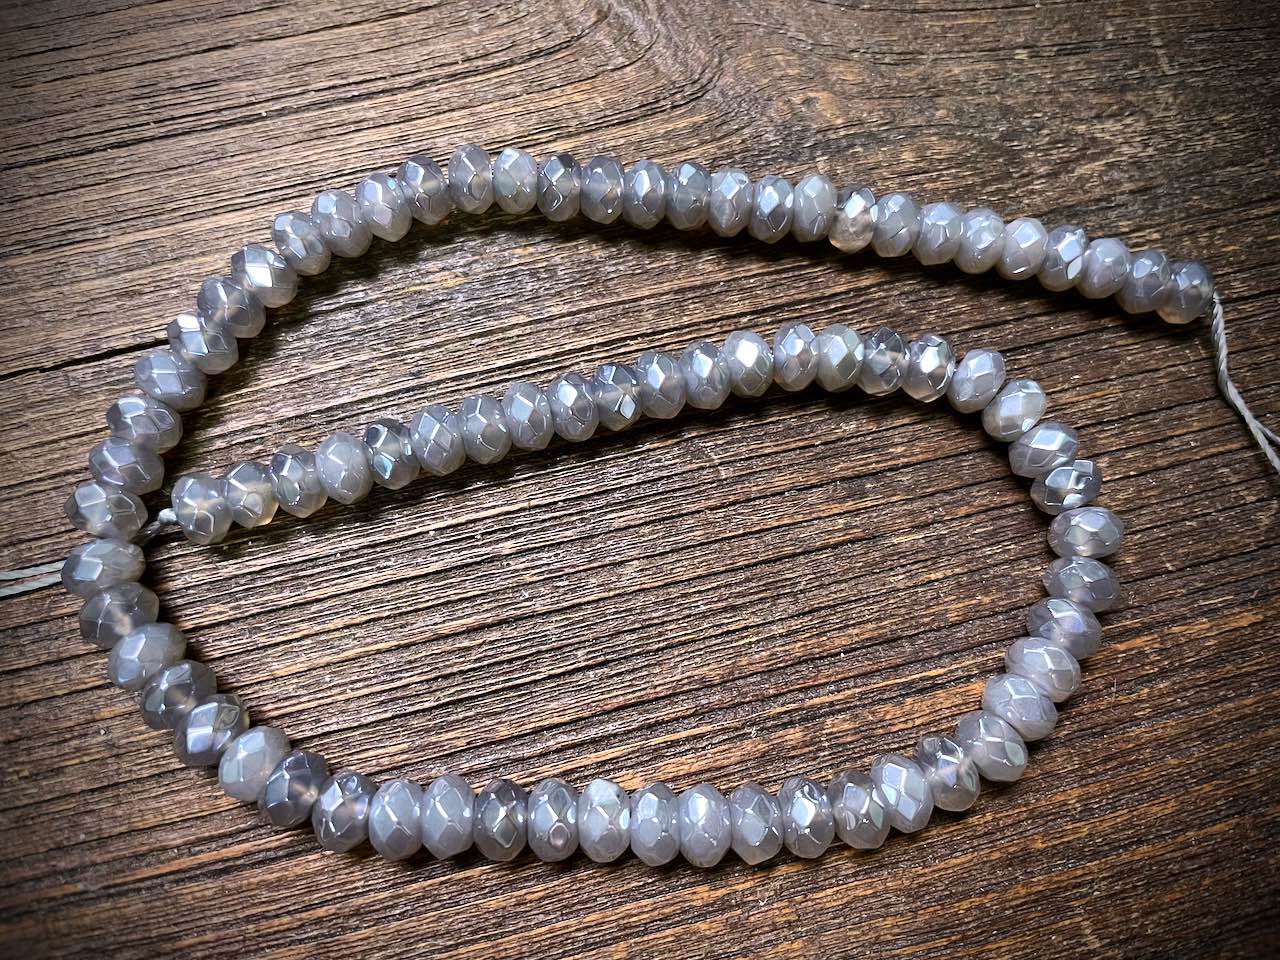 Plated Grey Agate Faceted Rondelles Bead Strand - 8mm x 5mm - 15"